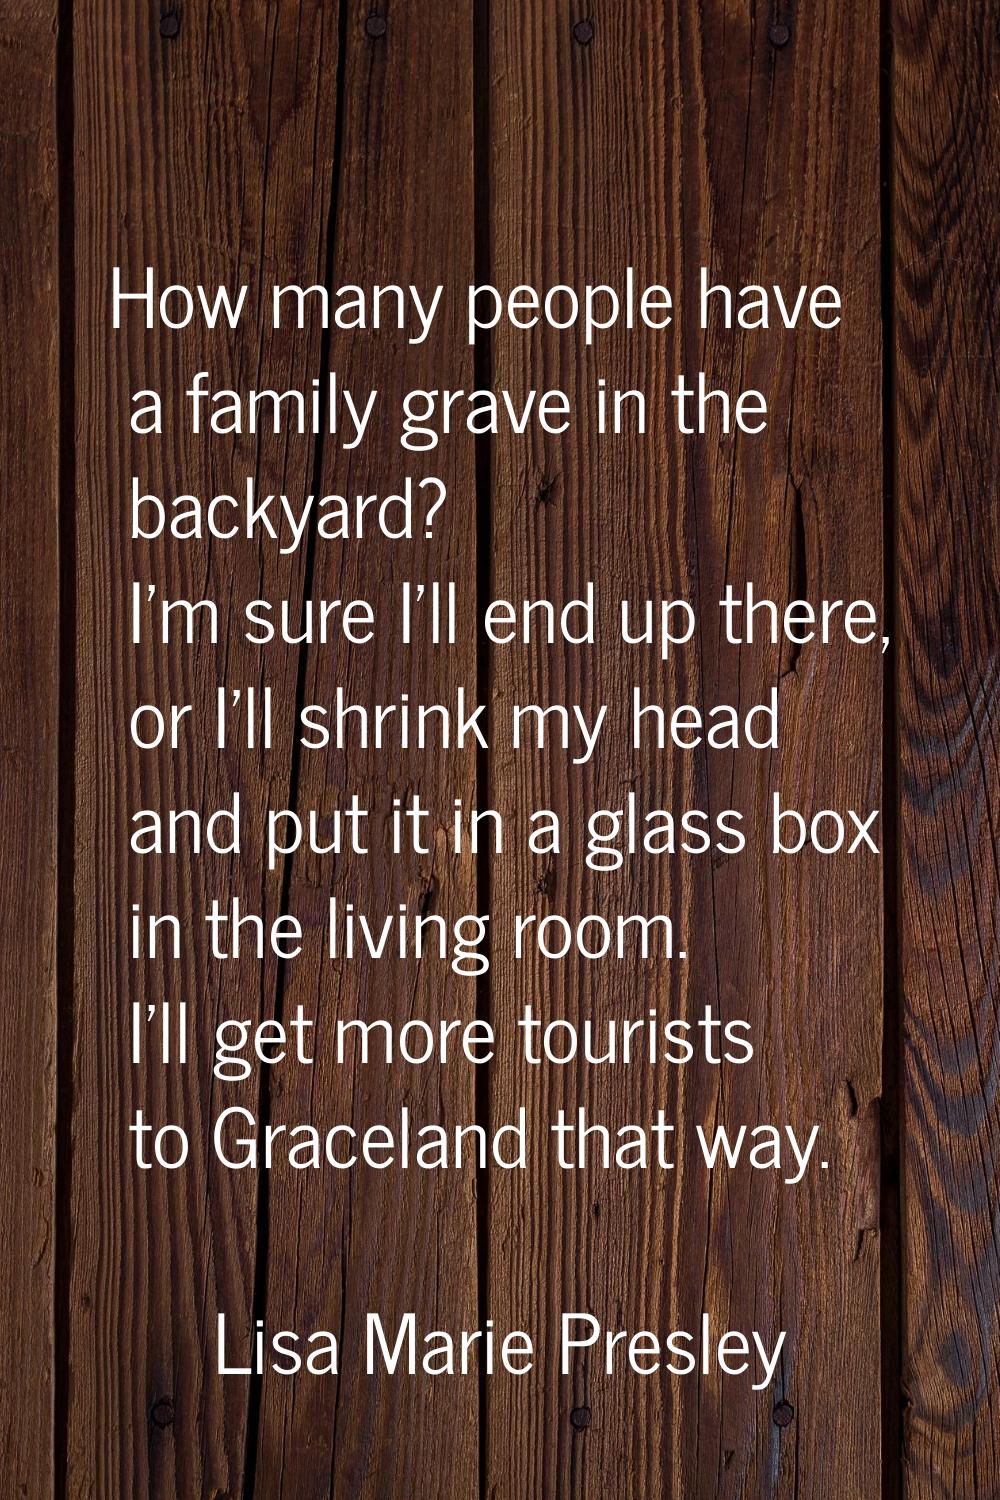 How many people have a family grave in the backyard? I'm sure I'll end up there, or I'll shrink my 